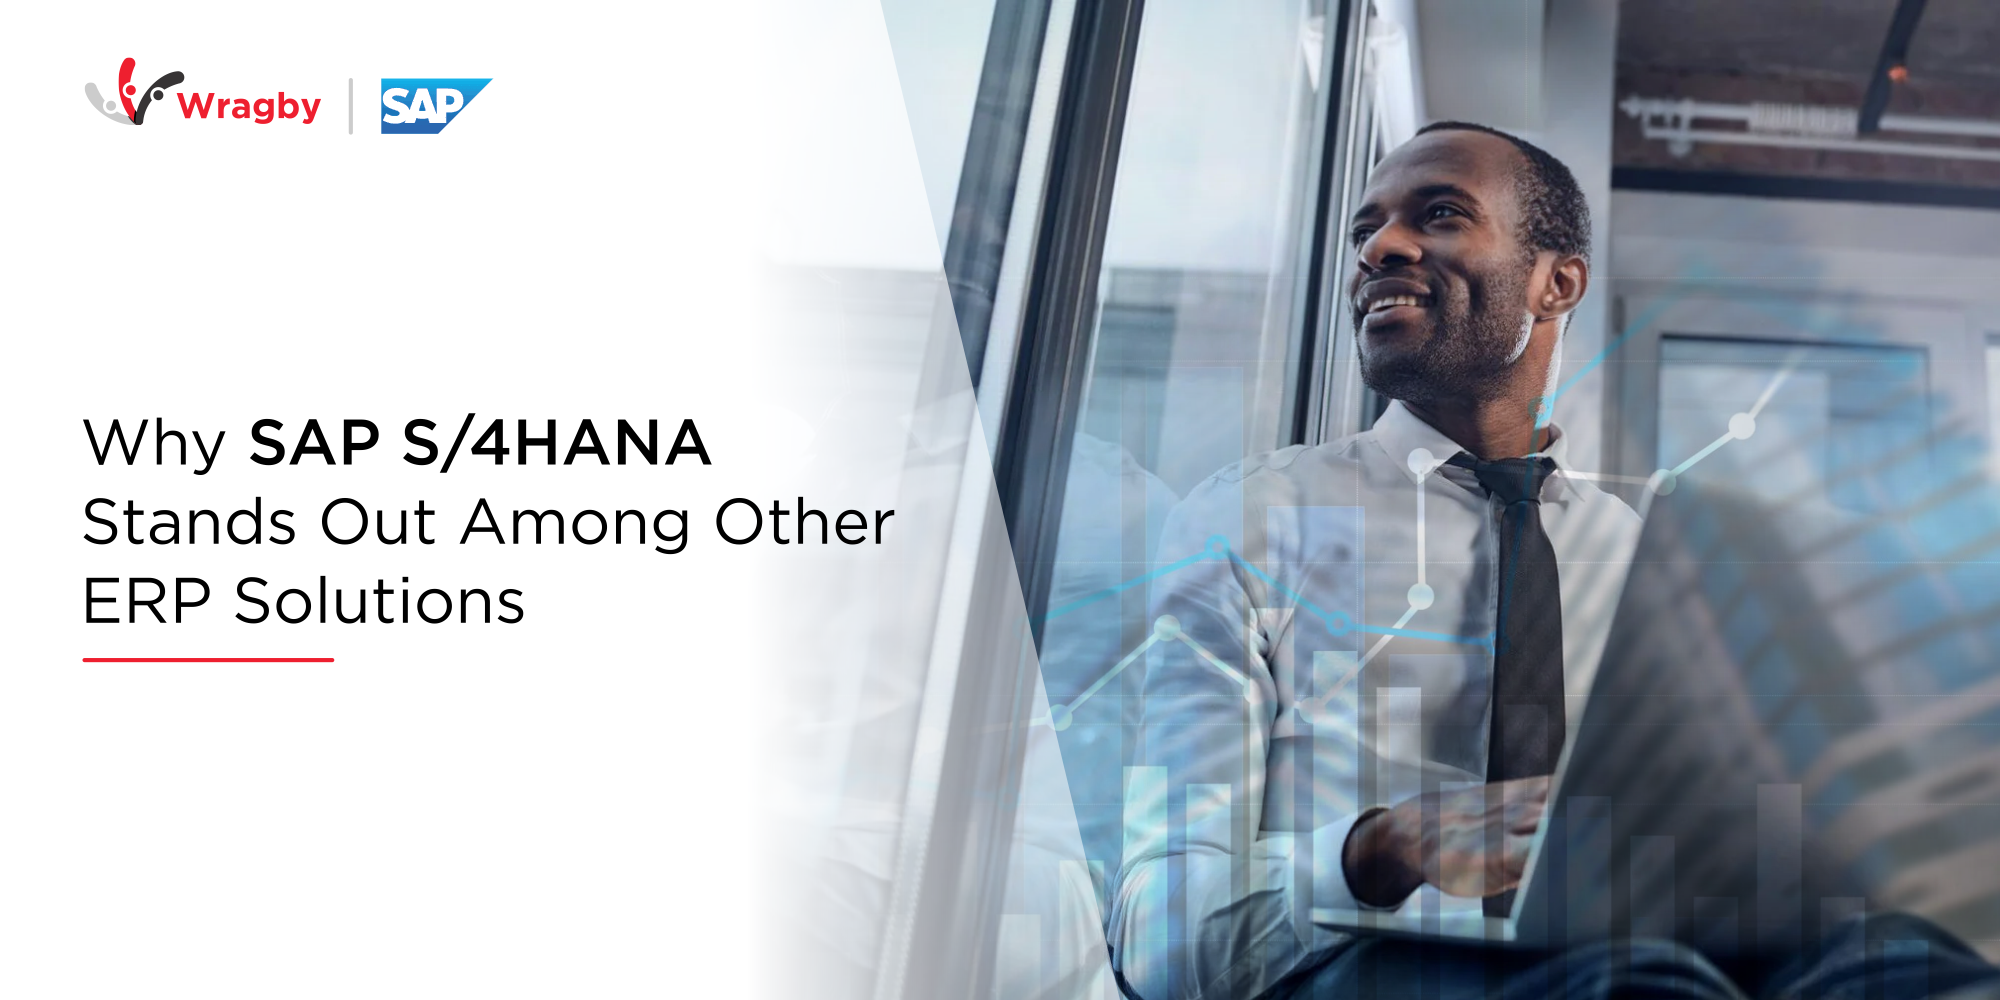 Why SAP S/4HANA stands out among other ERP Solutions